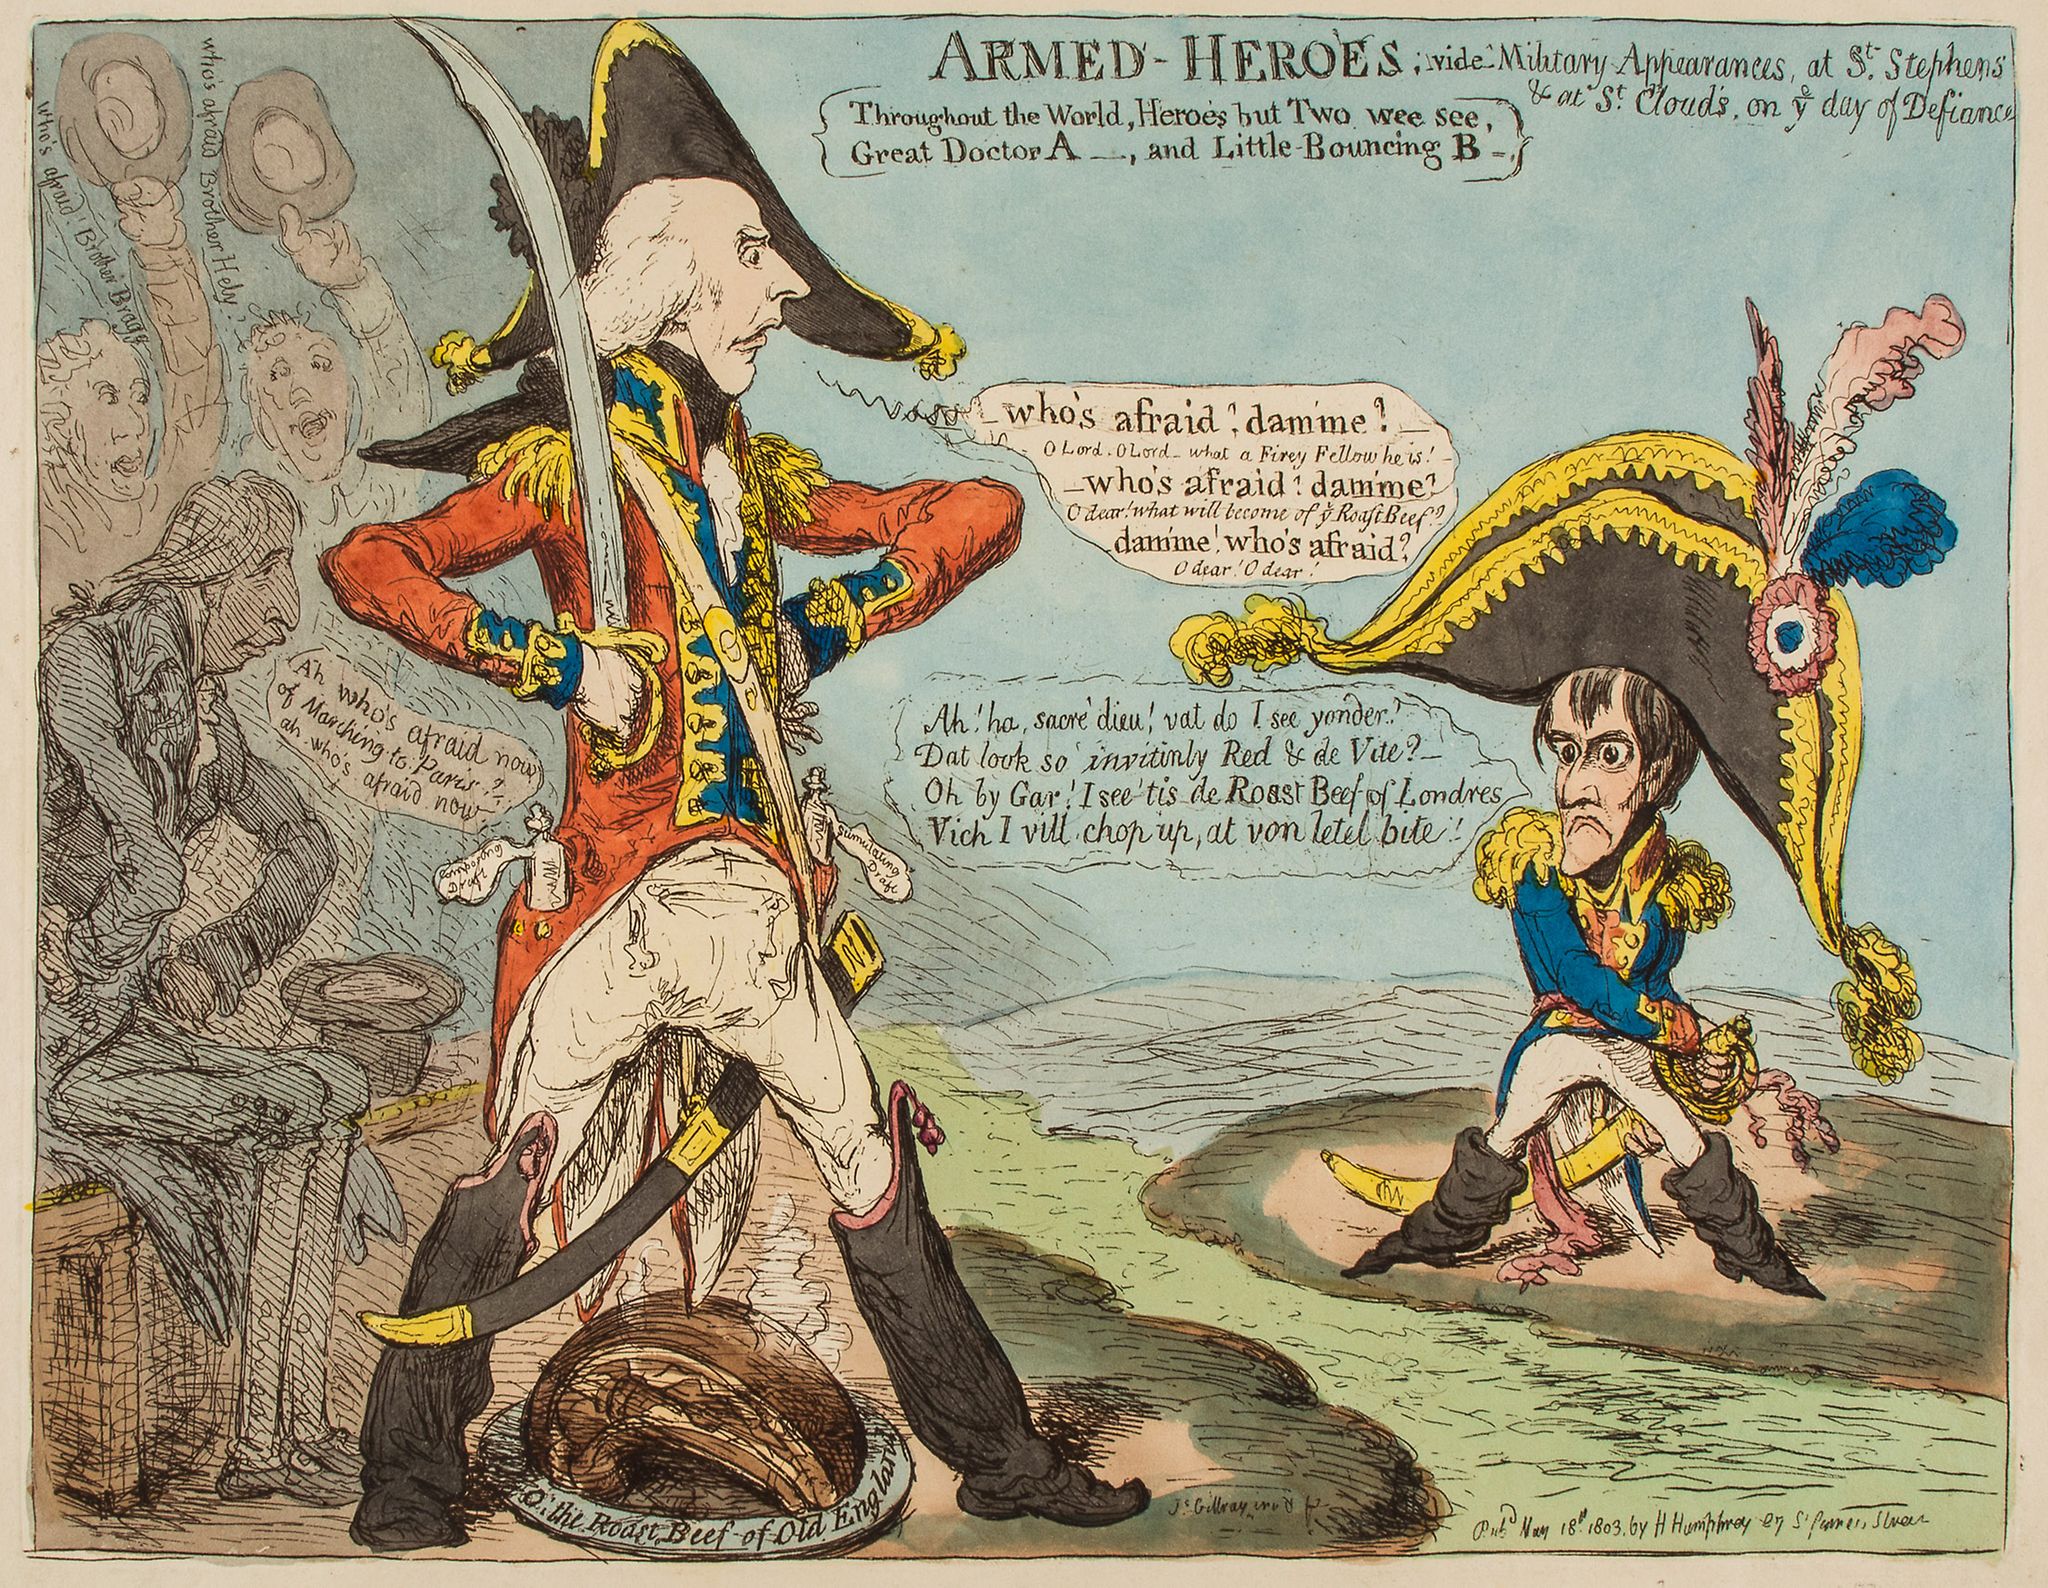 Gillray (James) - Armed Heroes, vide Military Appearances at St Stephens & at St Cloud's, on ye